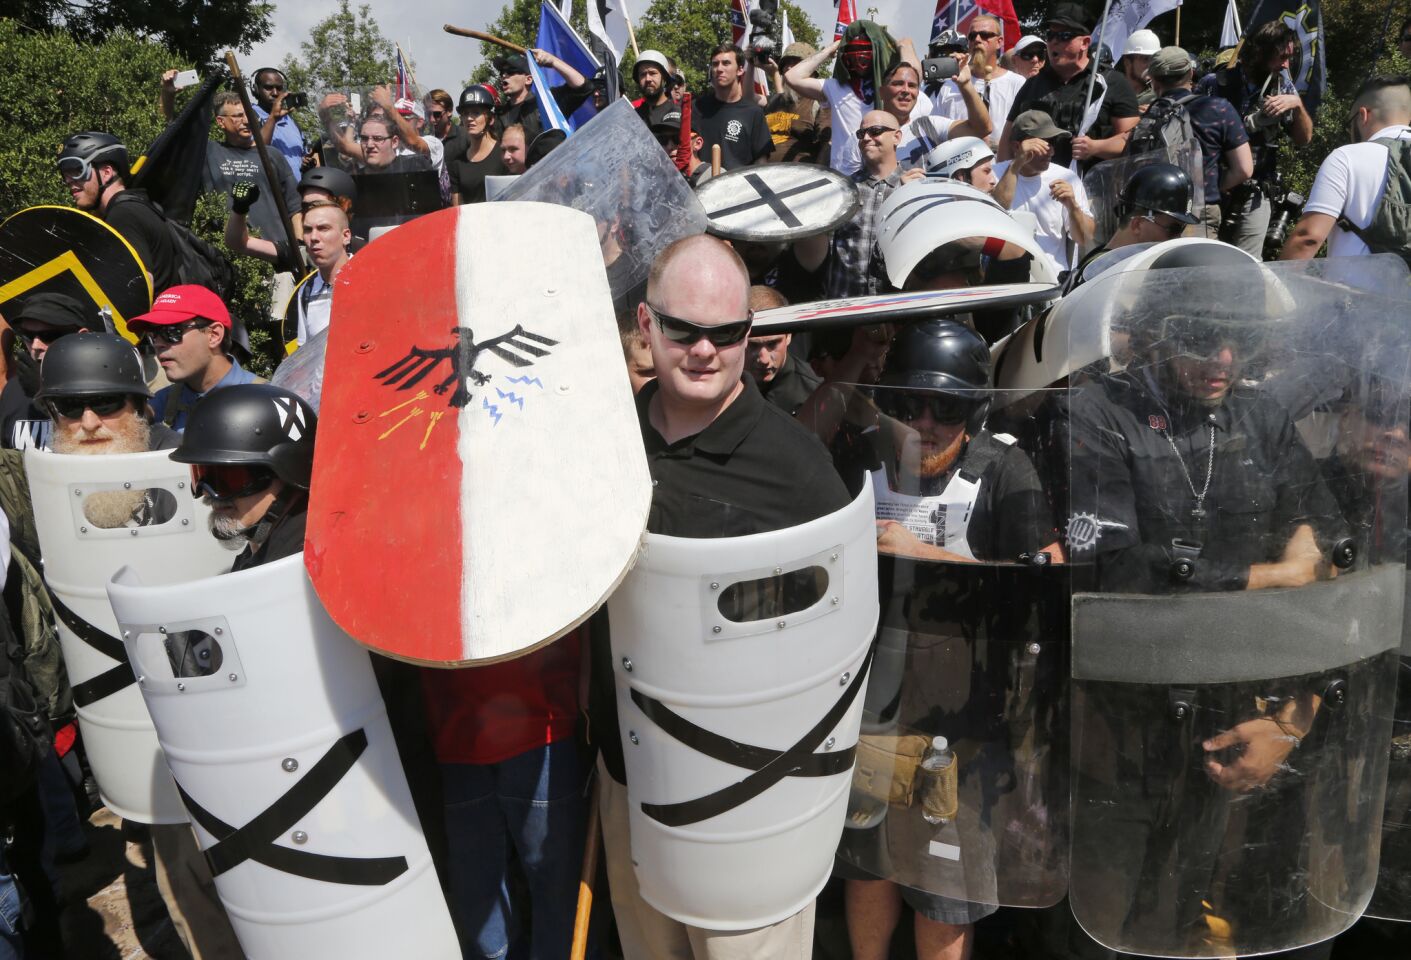 White nationalist demonstrators use shields as they guard the entrance to Lee Park in Charlottesville, Va.